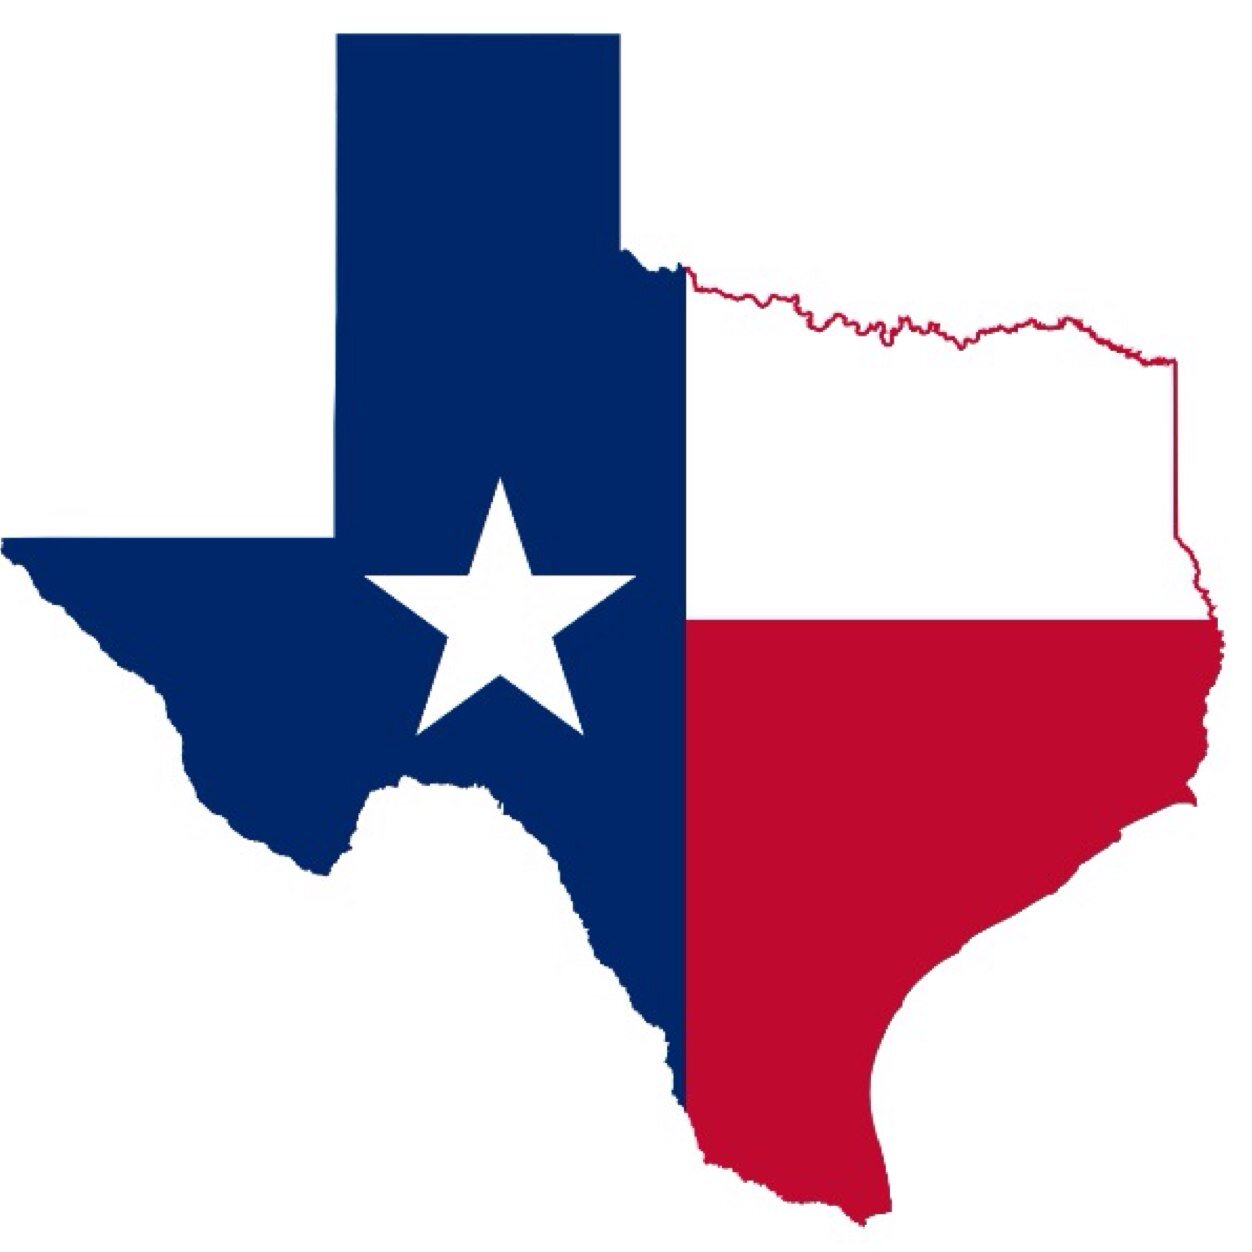 Free Market Economy. Private health care. Guns. Oil. Low income tax. Secede Texas, and thrive in a unified society.